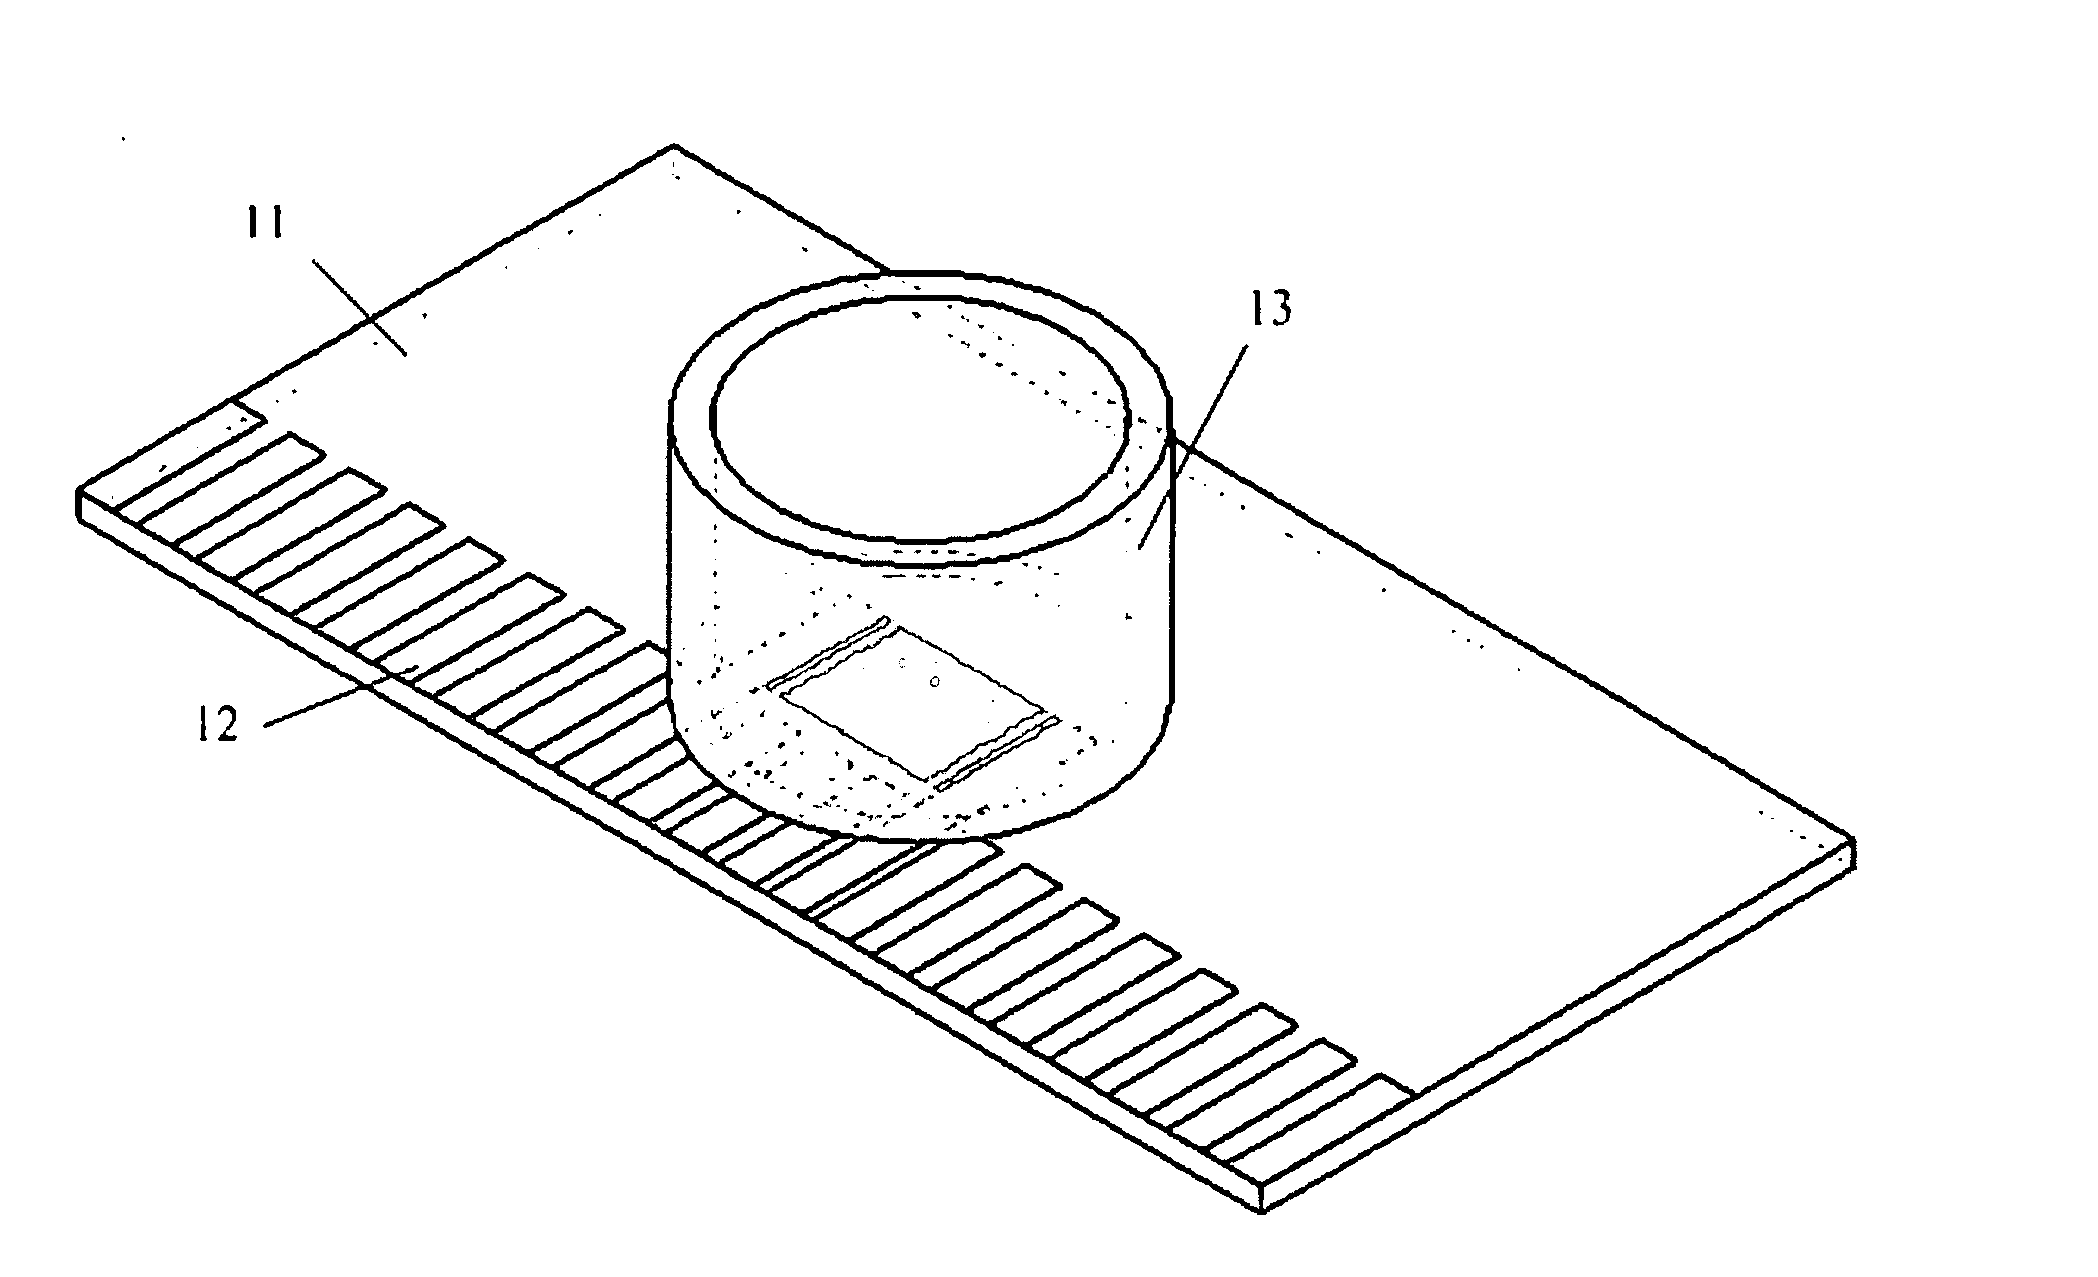 Method for detecting bioparticles